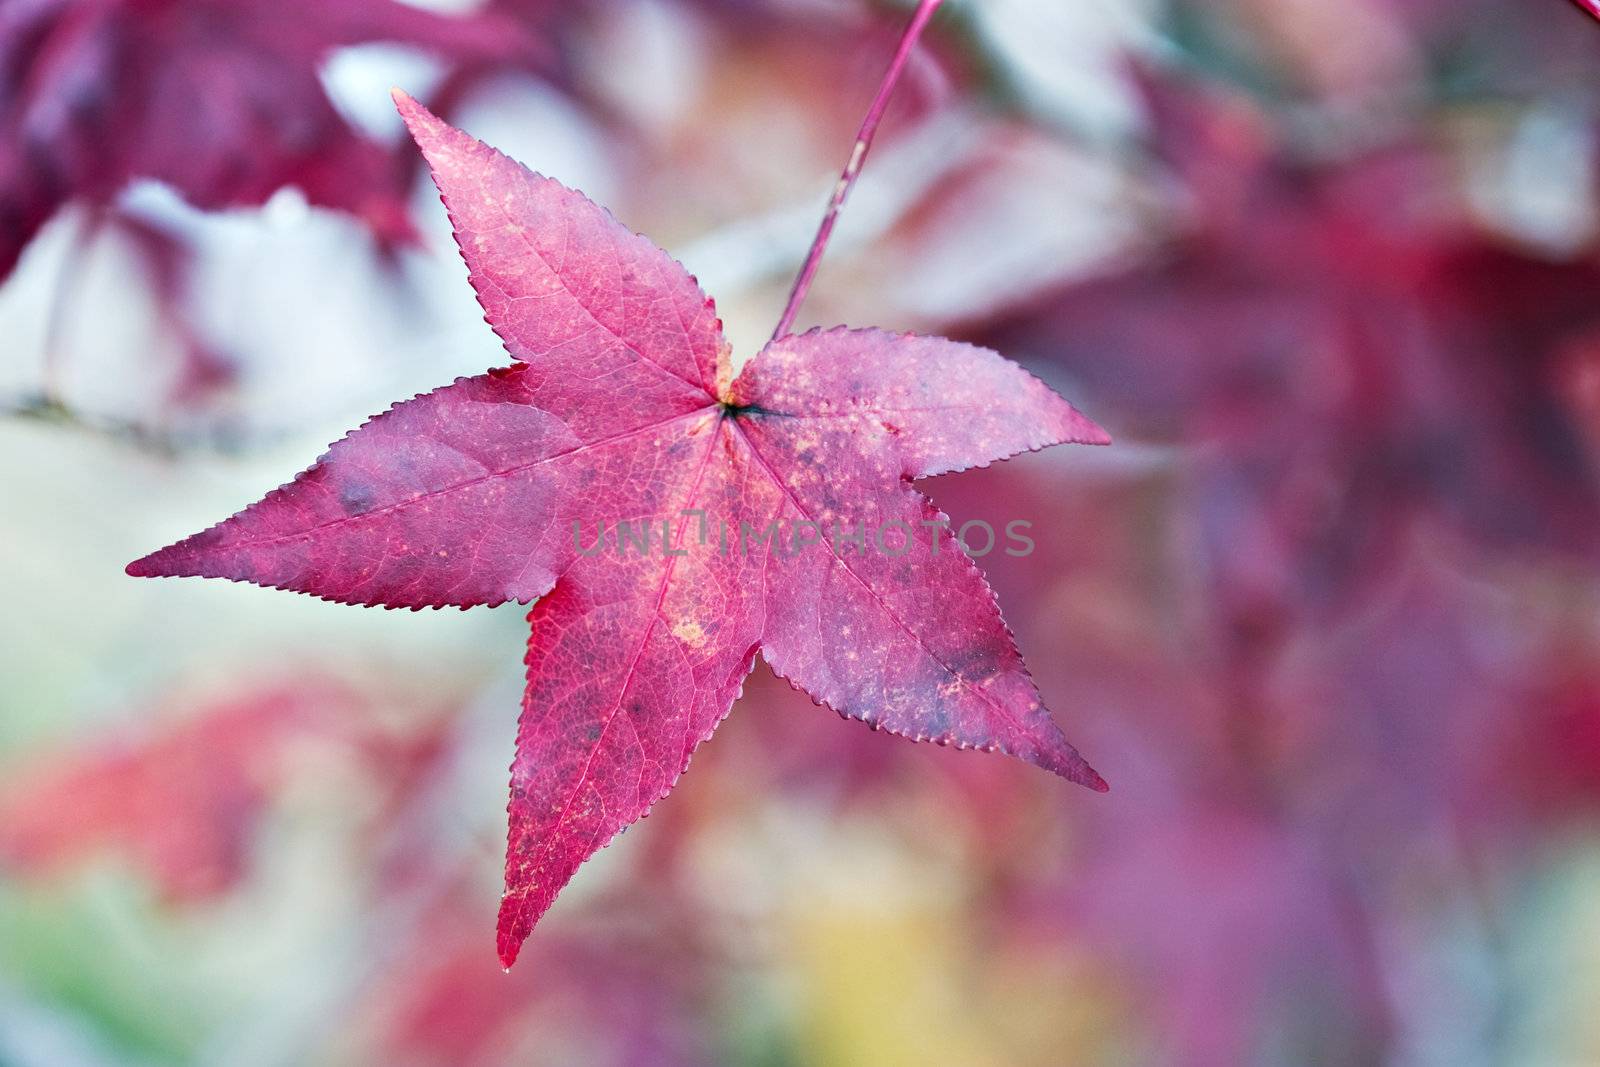 American Sweetgum Leaves in Autumn Color